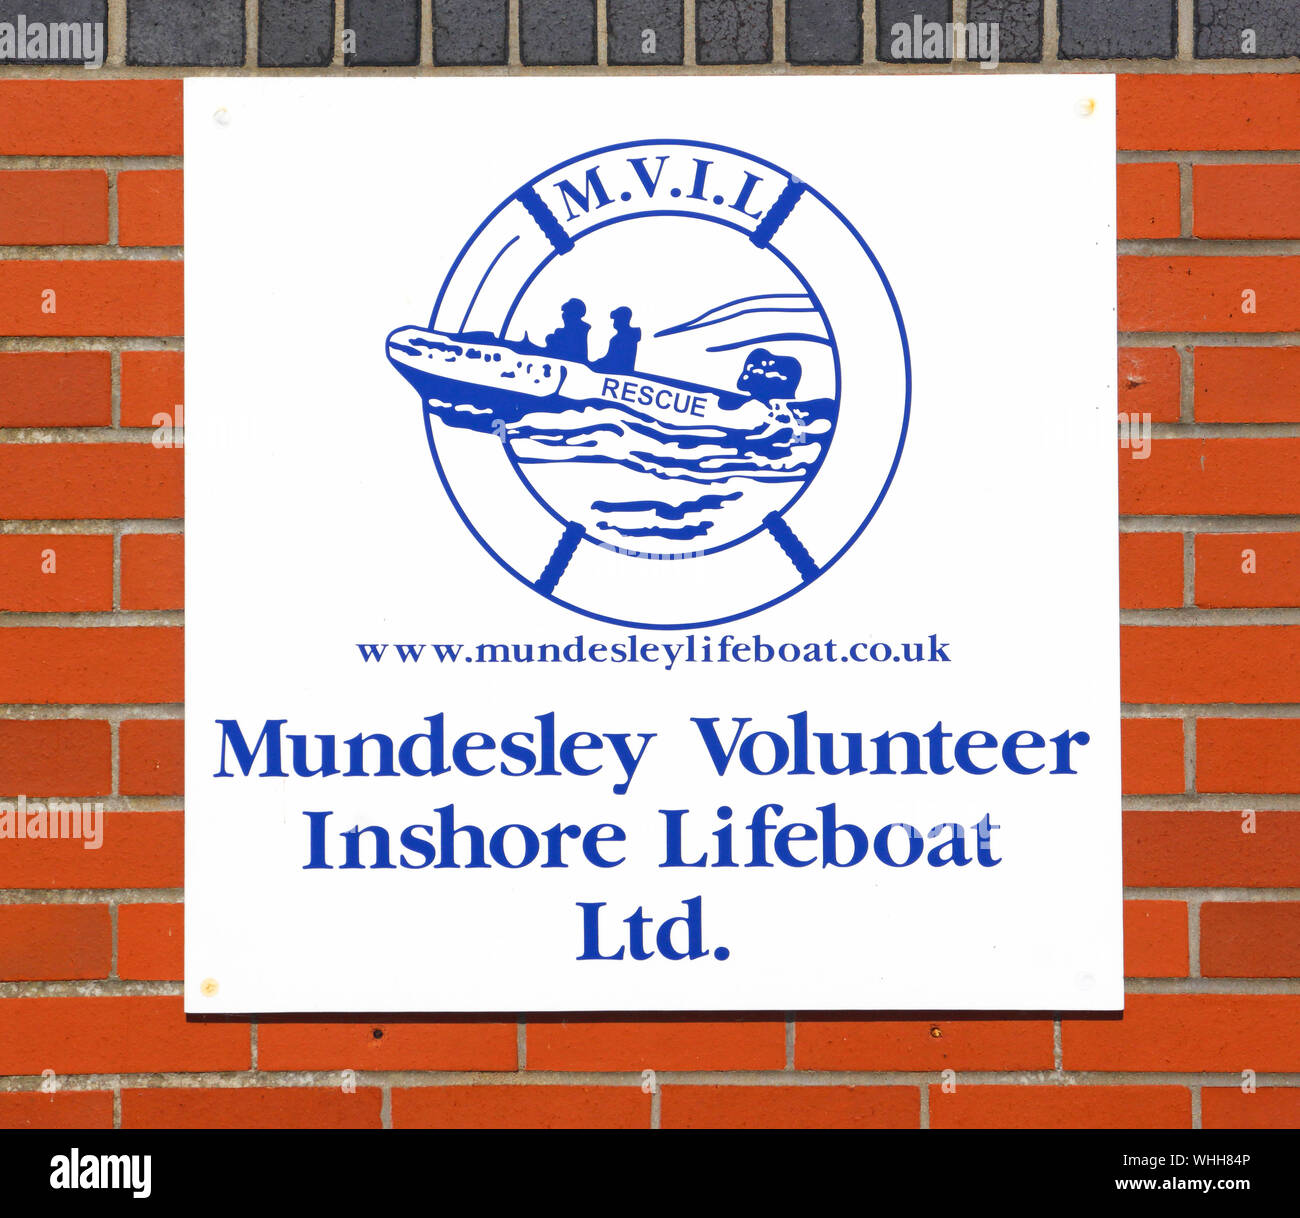 A logo and sign on the Volunteer Inshore Lifeboat house on the North Norfolk coast at Mundesley, Norfolk, England, United Kingdom, Europe. Stock Photo